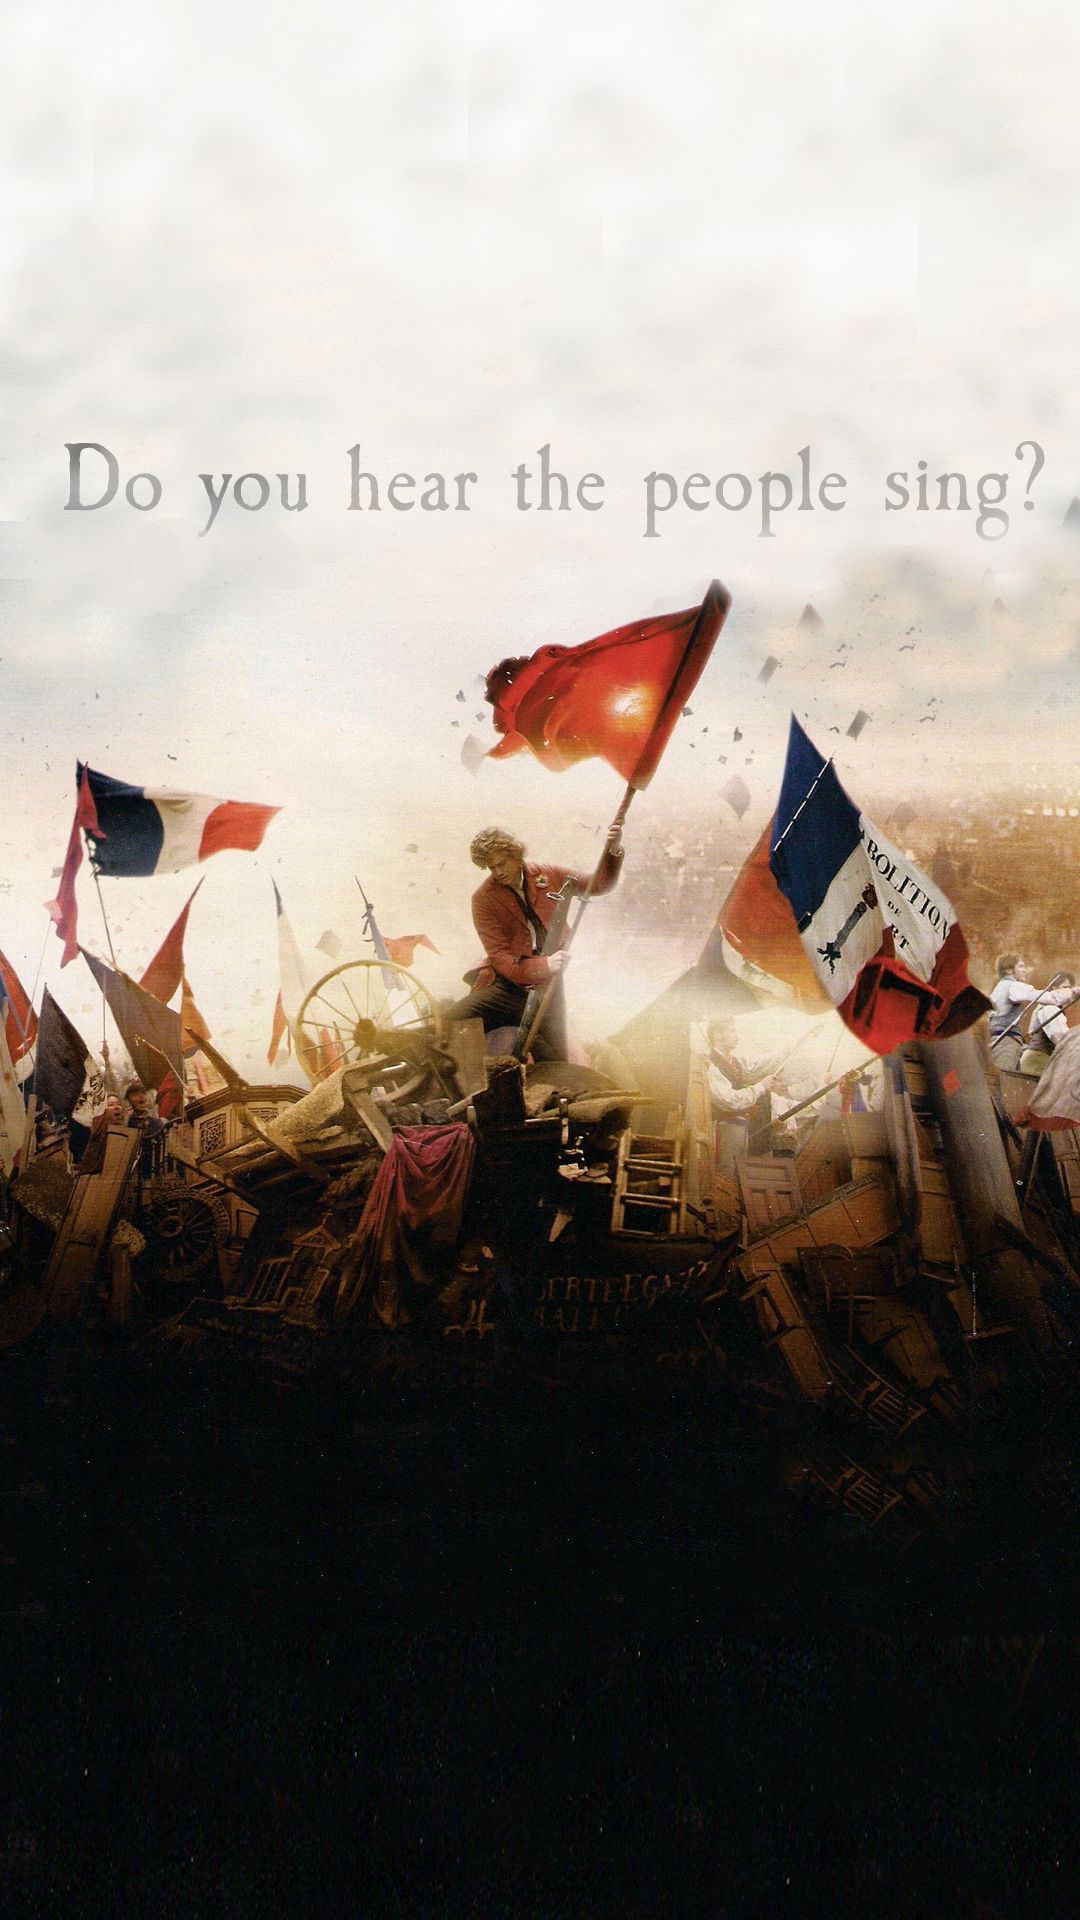 broadwaybackground. Les miserables, Les miserables movie, Broadway songs